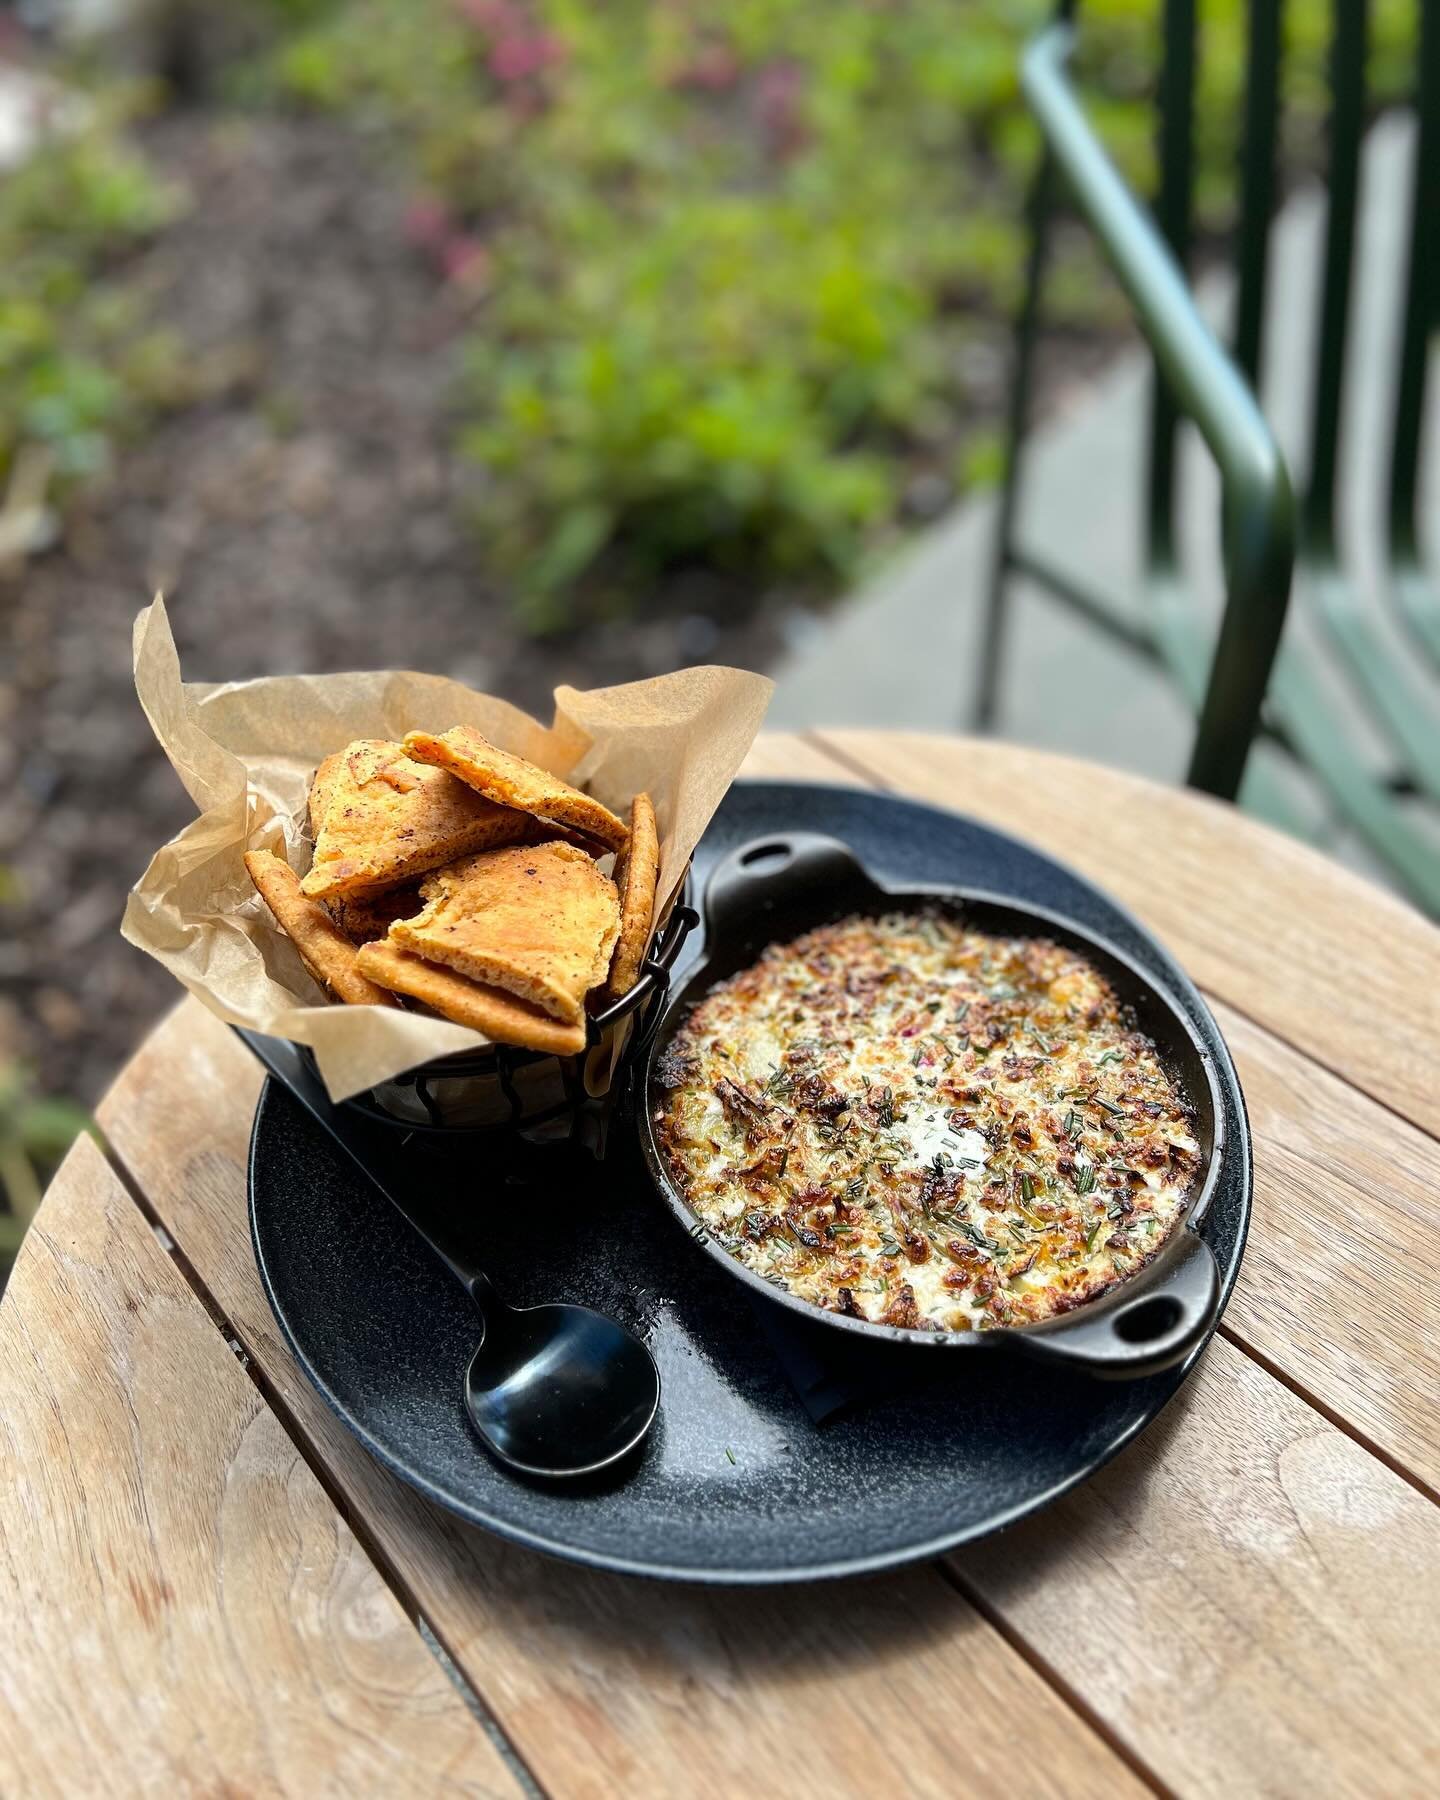 Introducing the newest addition to our menu - a creamy and indulgent spinach artichoke dip! Perfect for sharing with friends or enjoying as a solo treat. Trust us, you won&rsquo;t be able to resist this flavorful dish. 

Spinach and Artichoke Dip - a